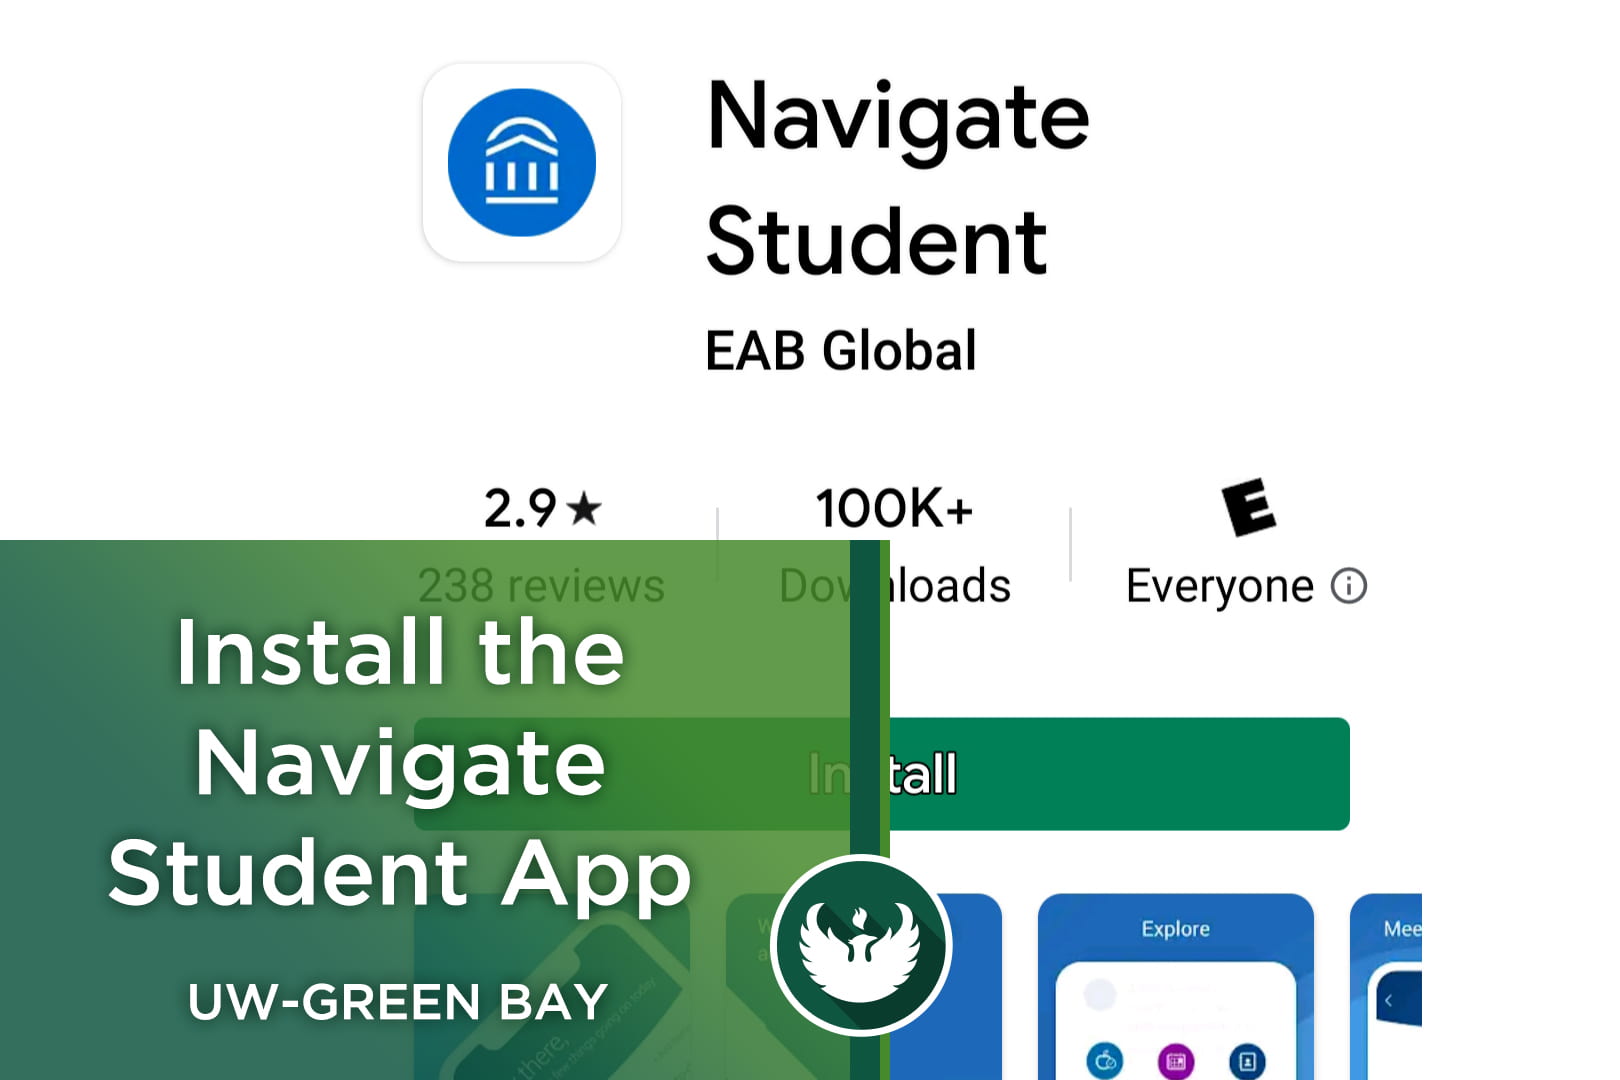 Photo of the Navigate Student app install screen.